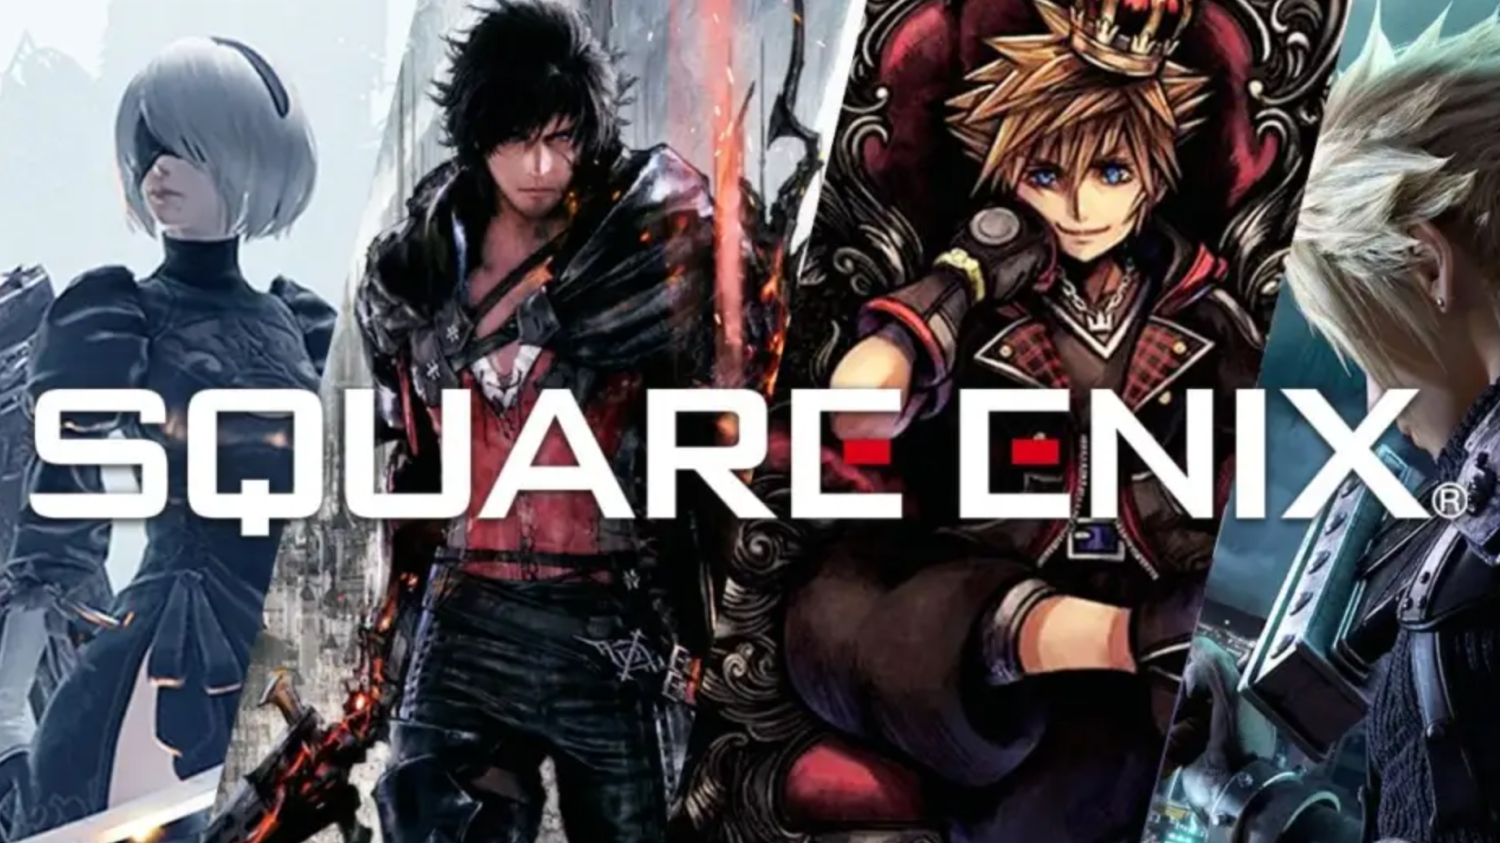 PlayStation Games published by Square Enix